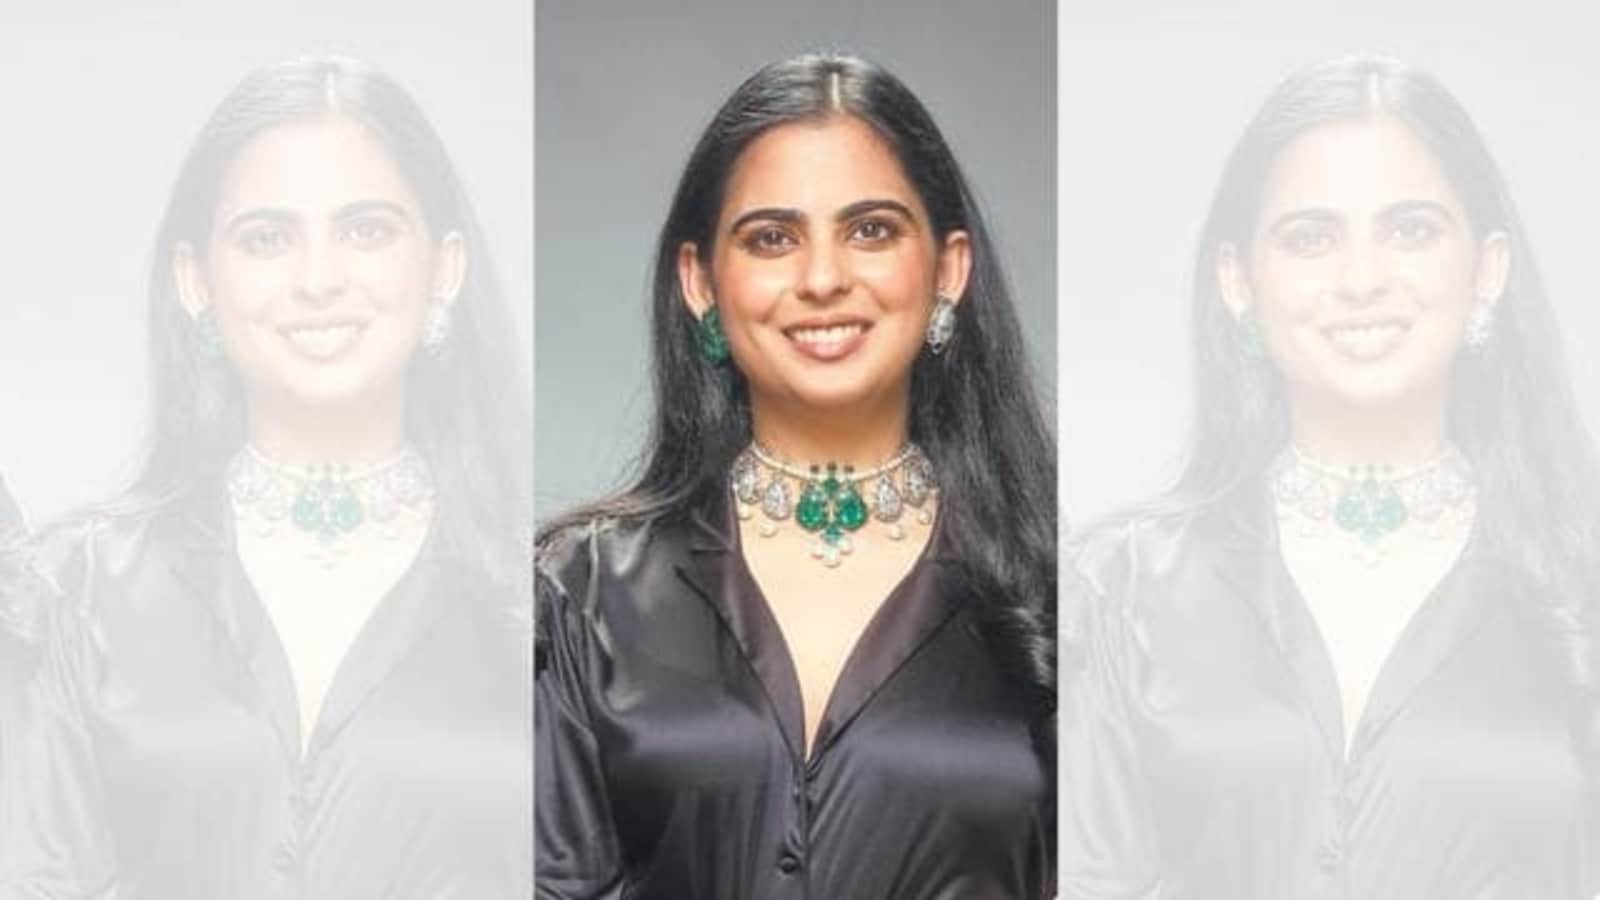 Isha Ambani ‘swears by’ these Bollywood tearjerkers, reveals her go-to karaoke song. Hint: They’re SRK films